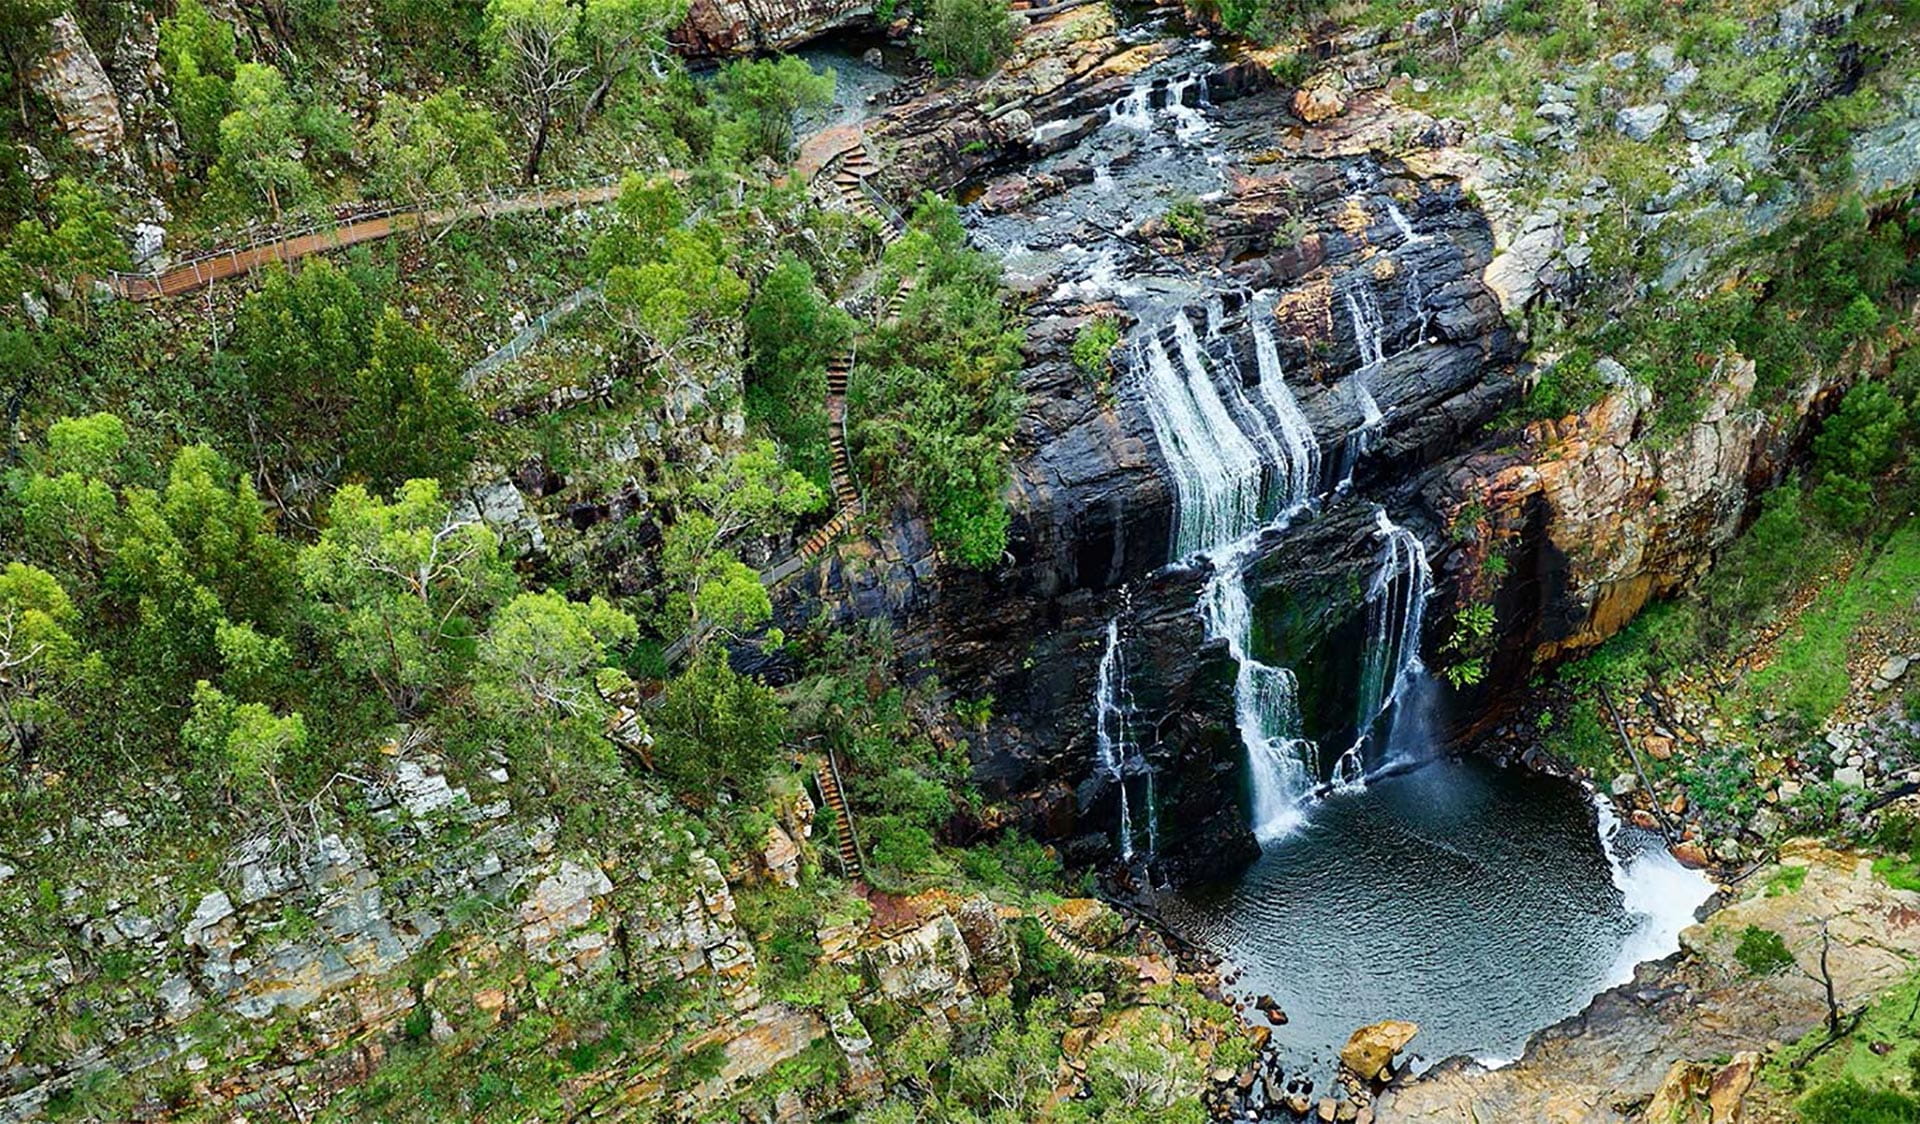 A young couple cross the stream on rocks in front a the spectacular MacKenzies Falls.